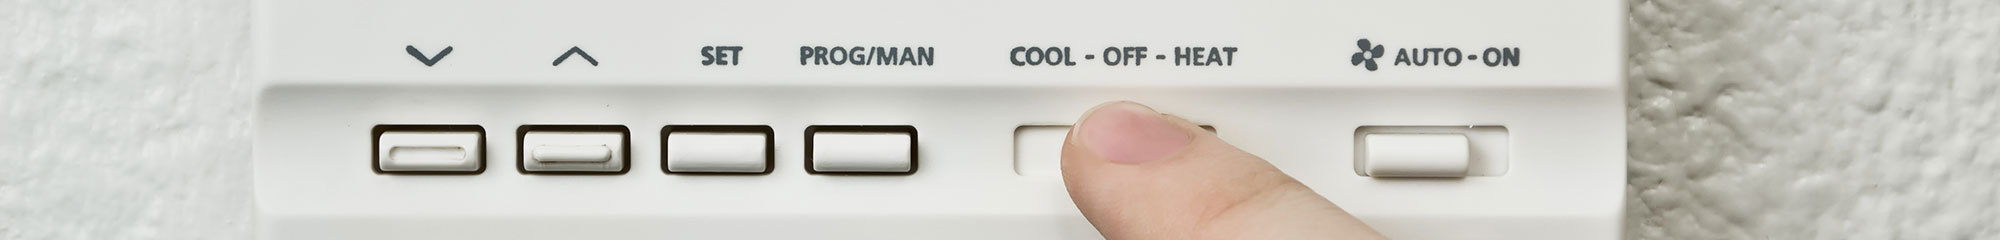 How to Improve the Performance of Your HVAC System with a Programmable Thermostat